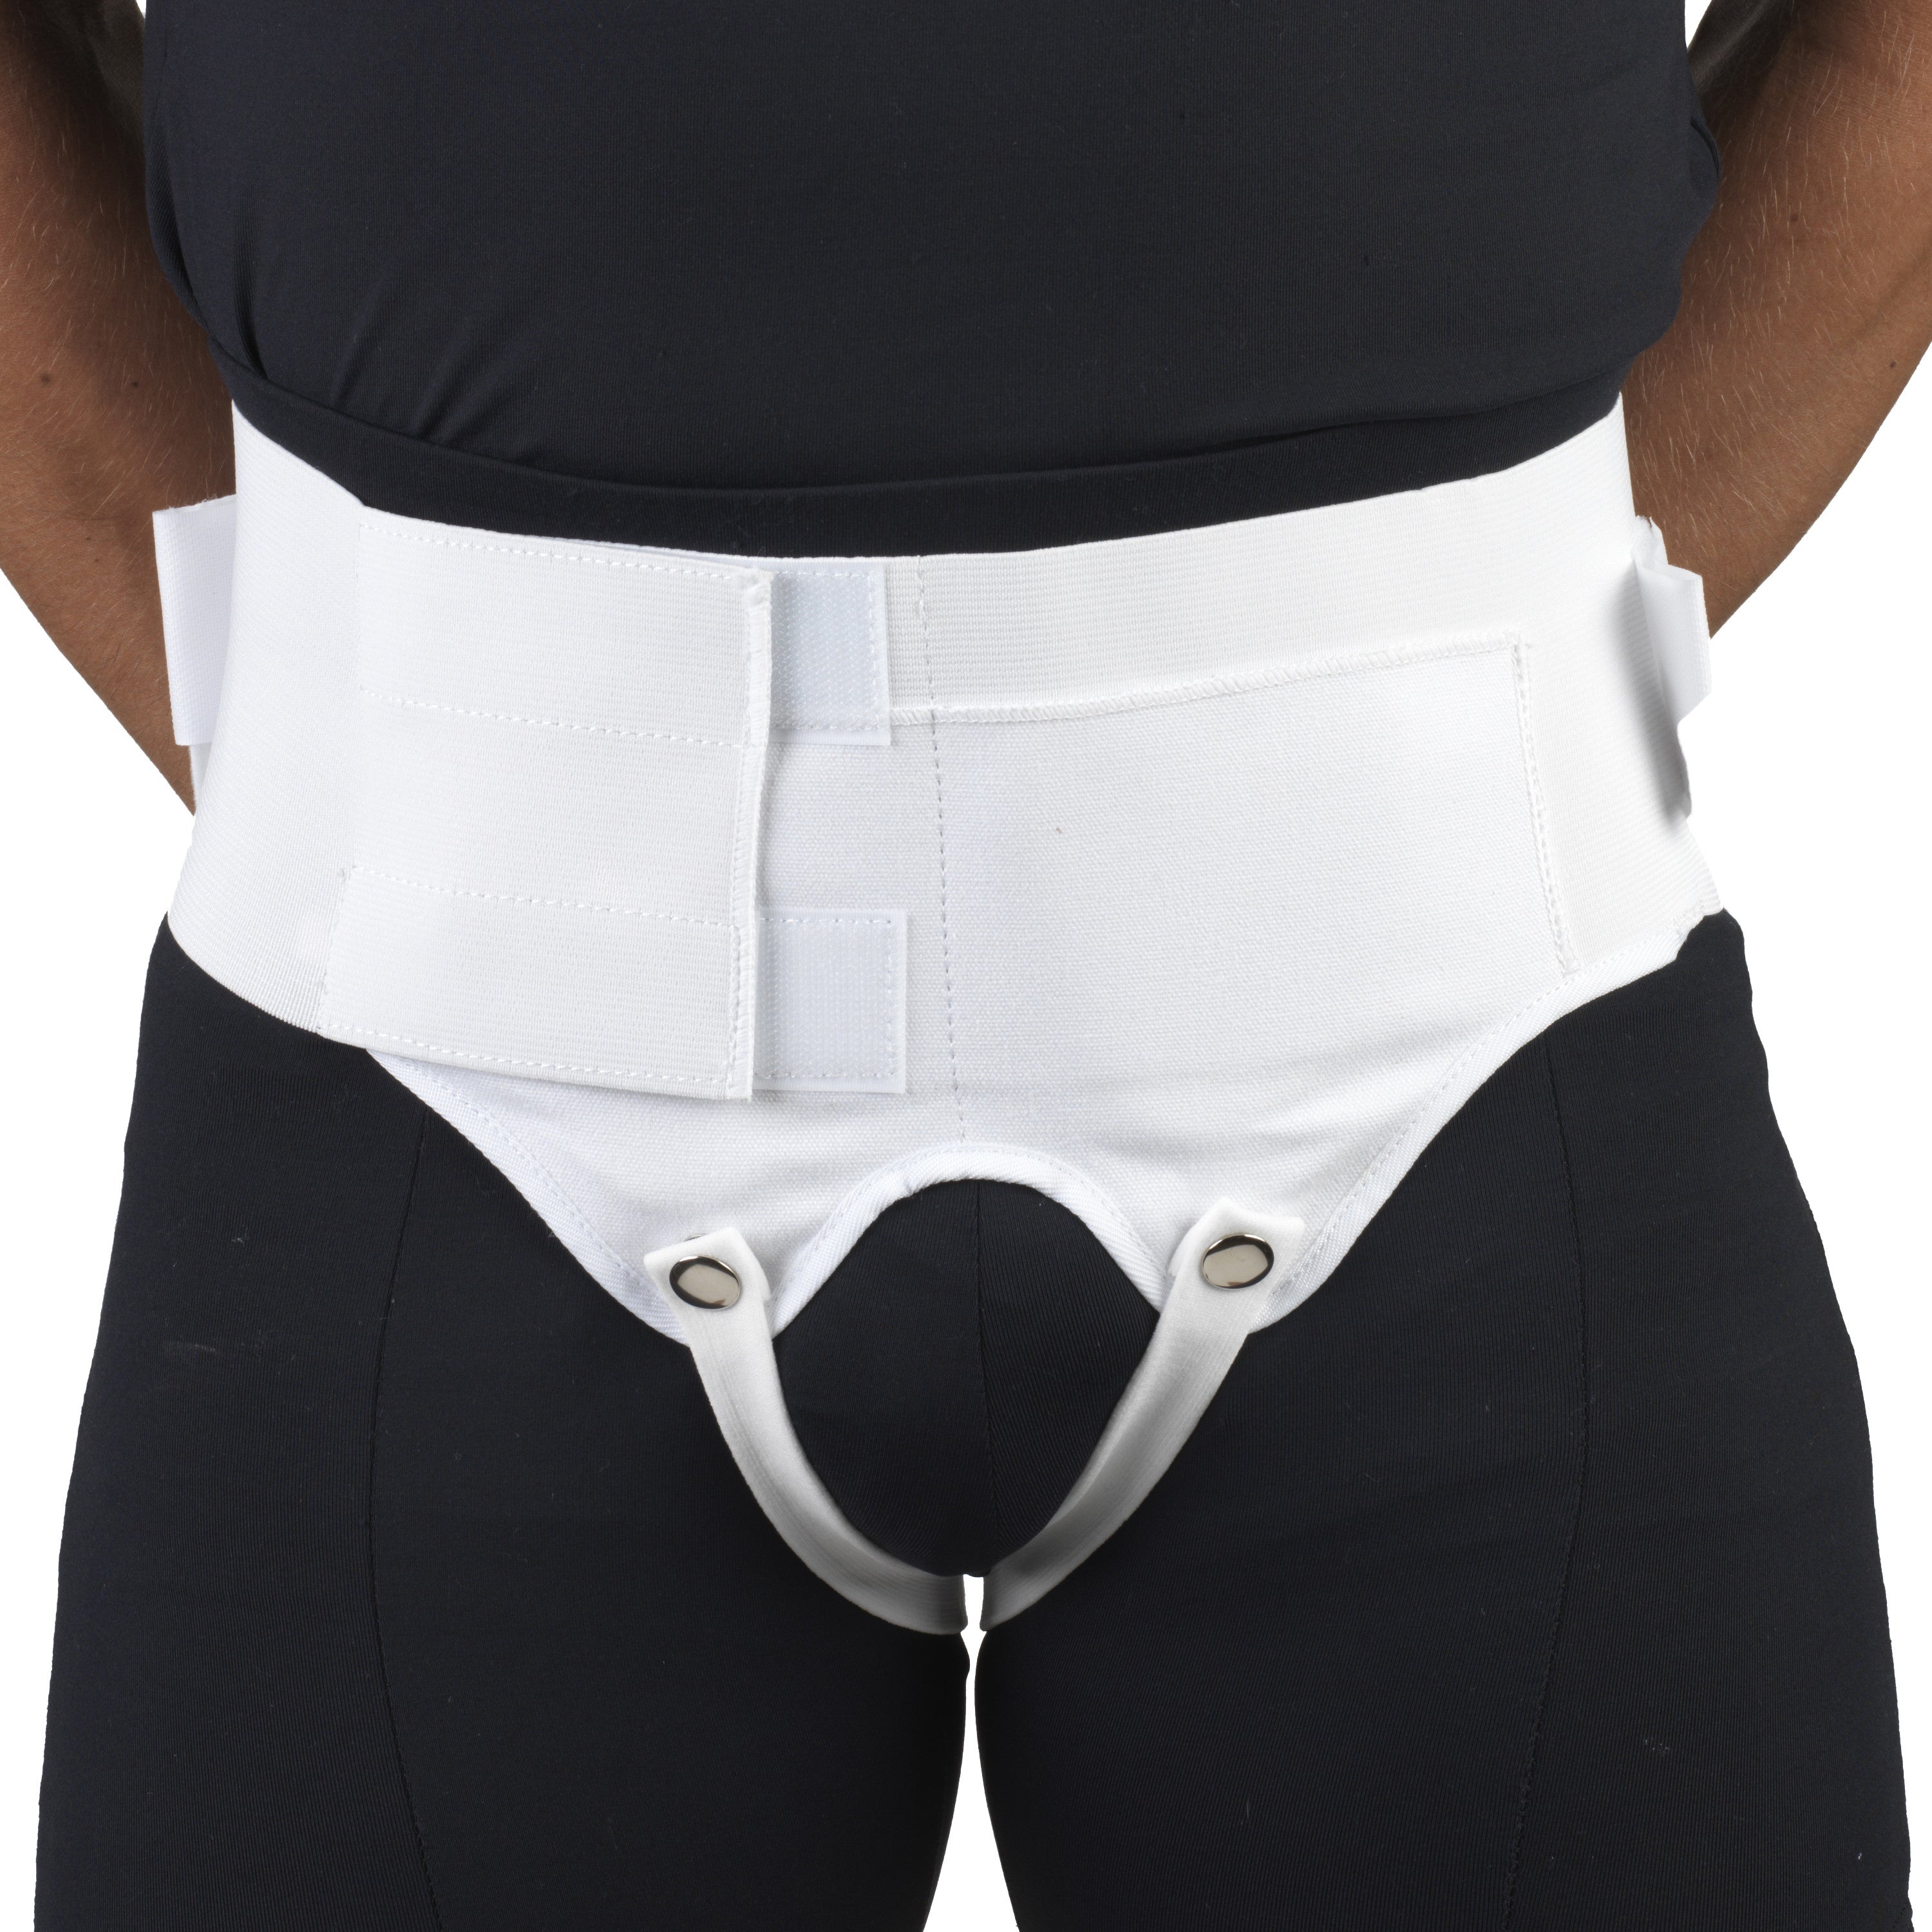 CARE Umbilical Hernia Support Belt Abdominal Navel Truss One Removeable